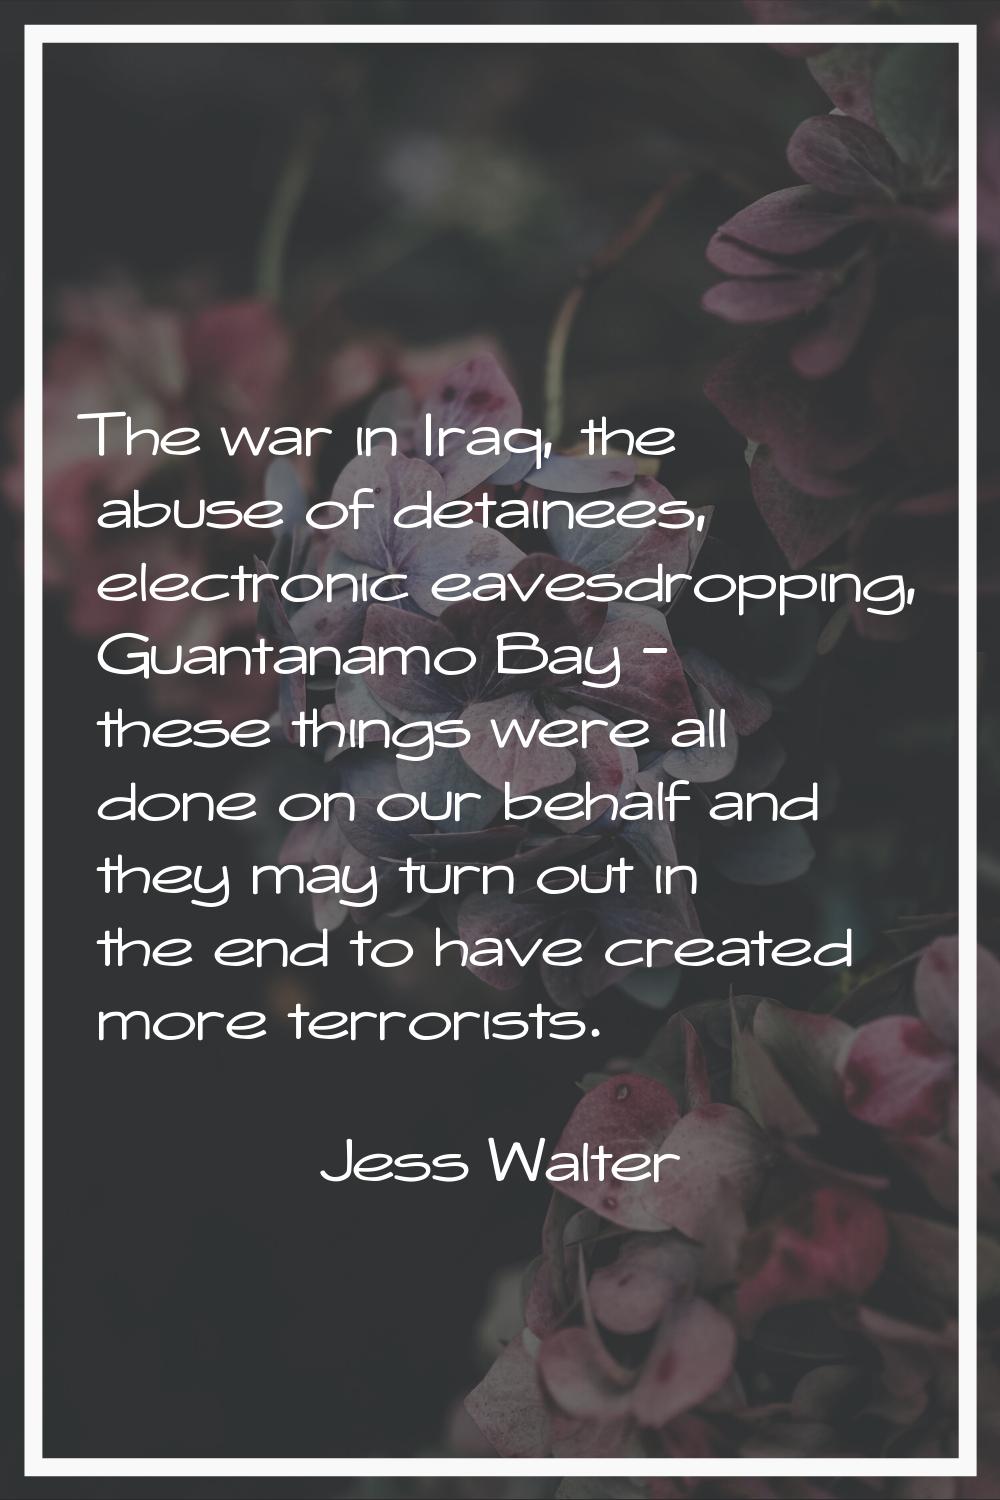 The war in Iraq, the abuse of detainees, electronic eavesdropping, Guantanamo Bay - these things we